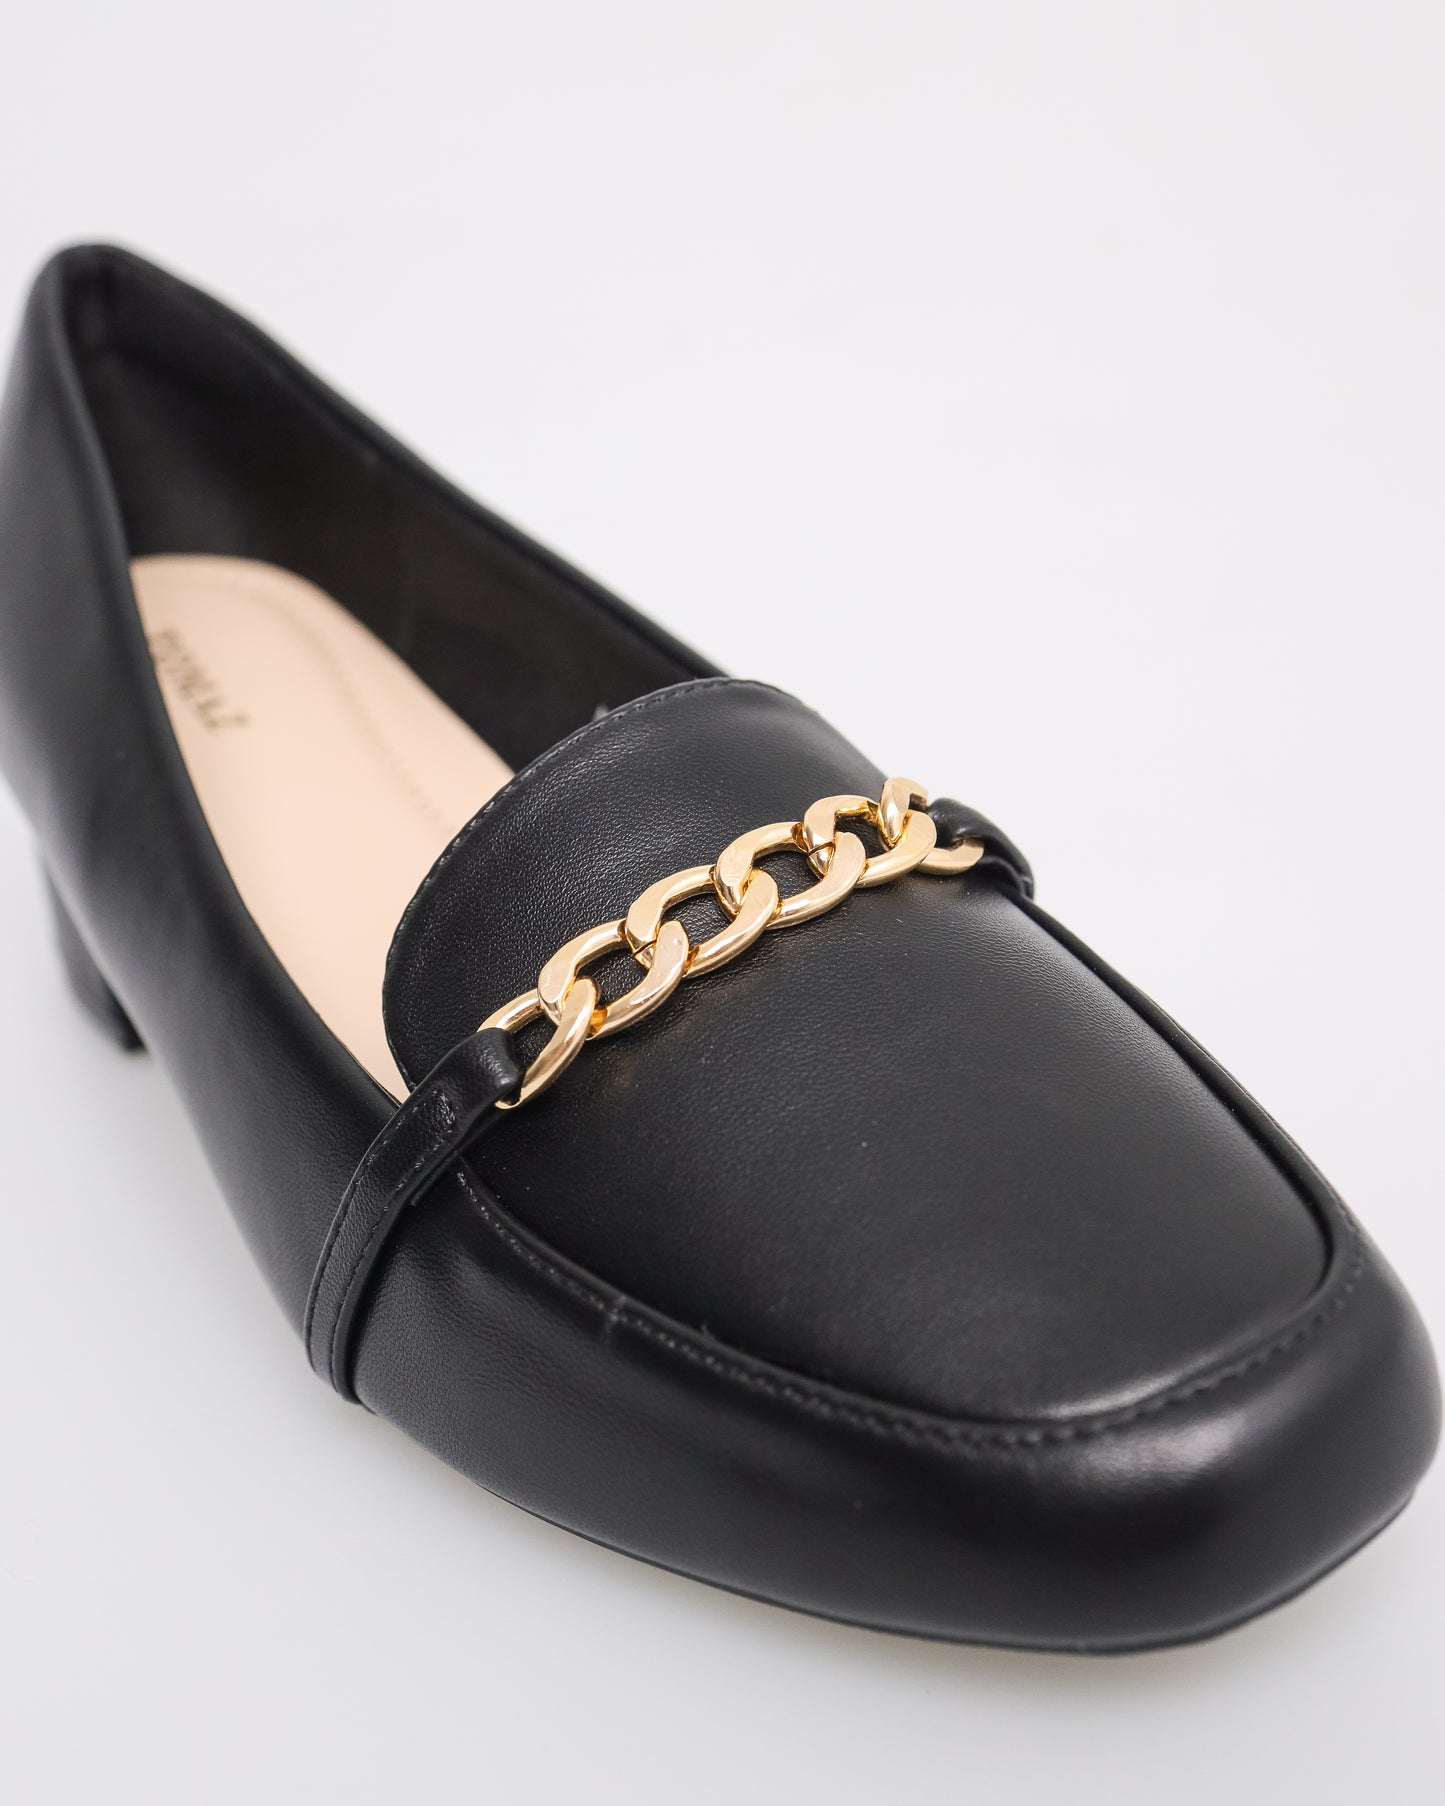 Tomaz NN205 Ladies Chained-Buckle Heeled Loafer (Black)